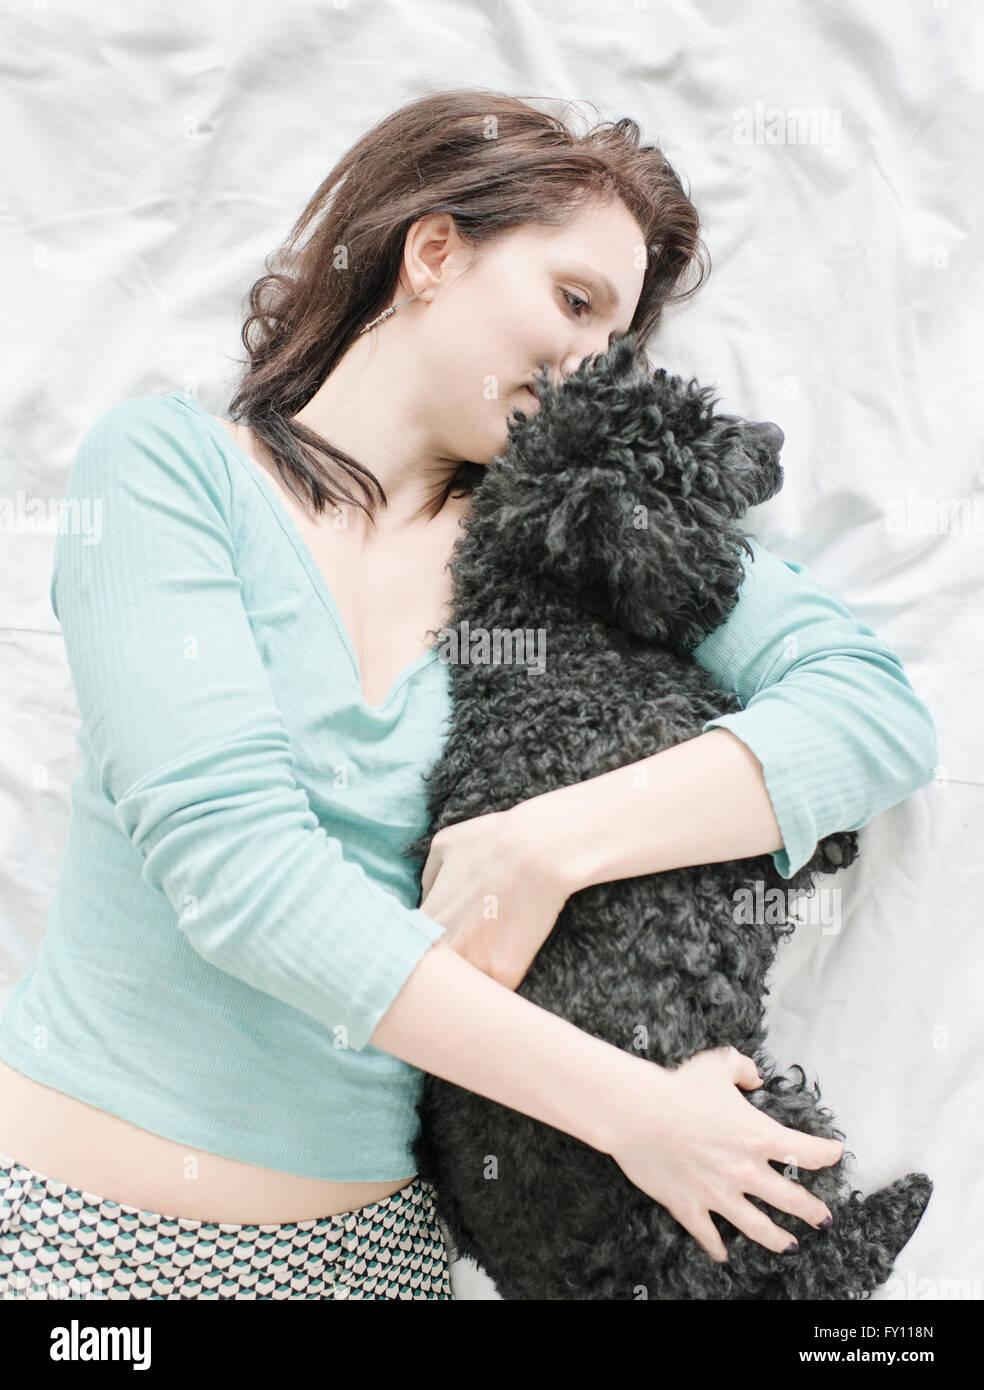 Woman lying in bed hugging black poodle. Lifestyle image showing affection and the bond between dog and human. Stock Photo